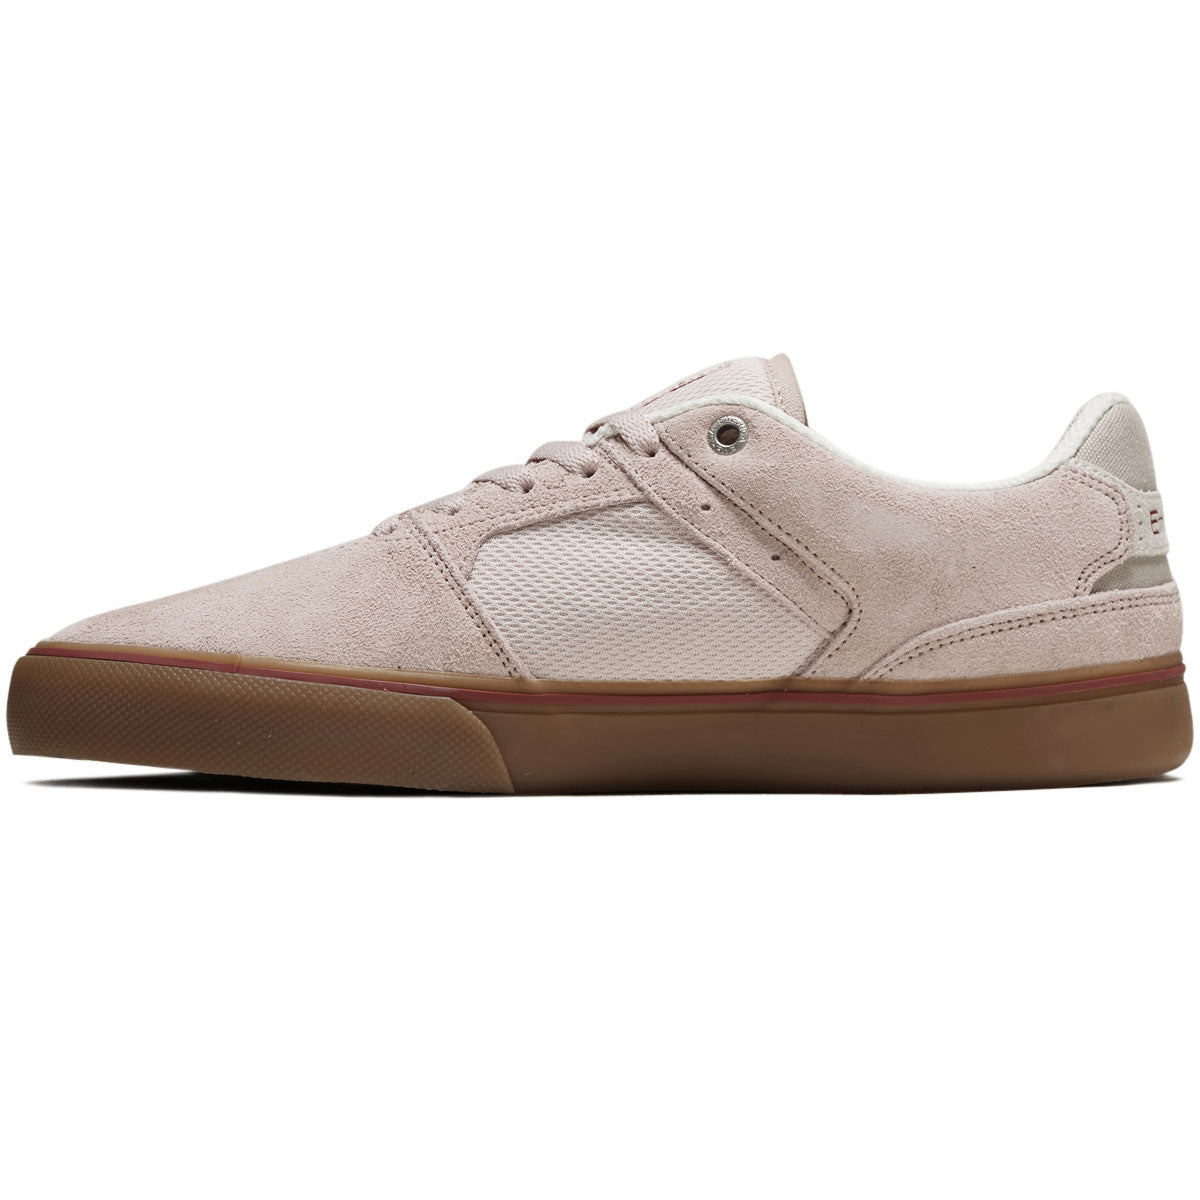 Emerica The Low Vulc Shoes - Pink image 2